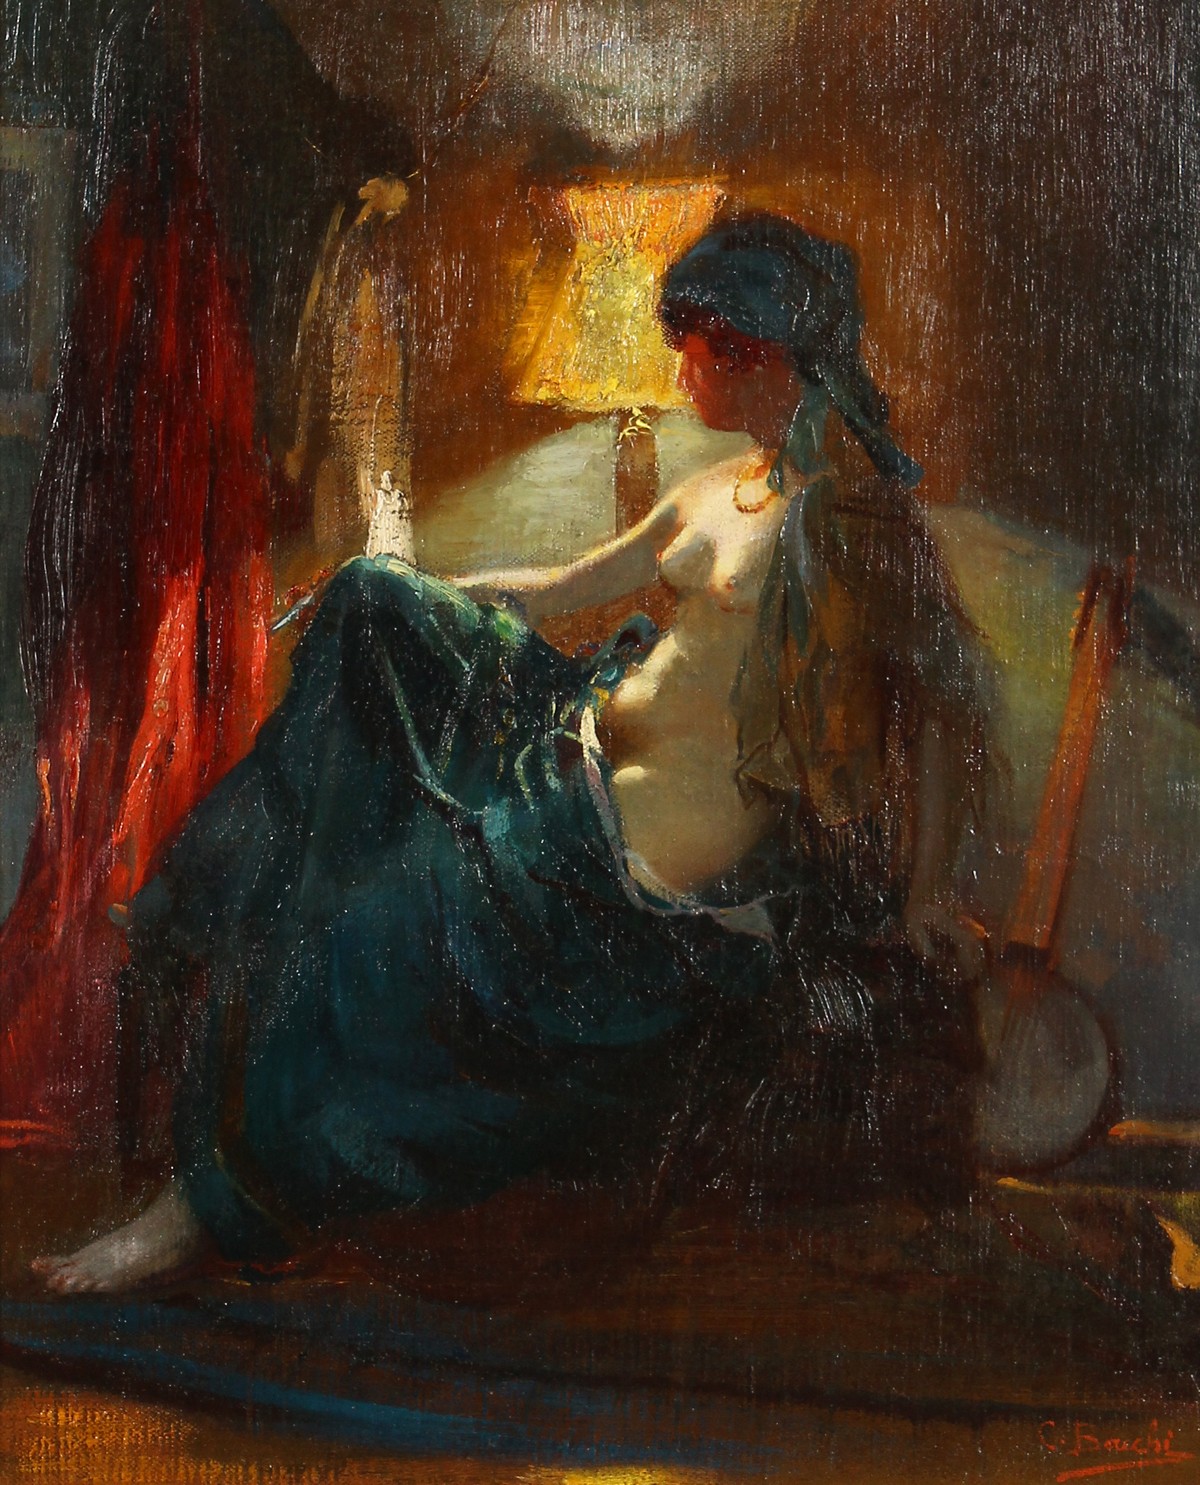 C. Bouchi (20th century) a study of a scantily clad gypsy woman, oil on canvas, signed, 21.5" x